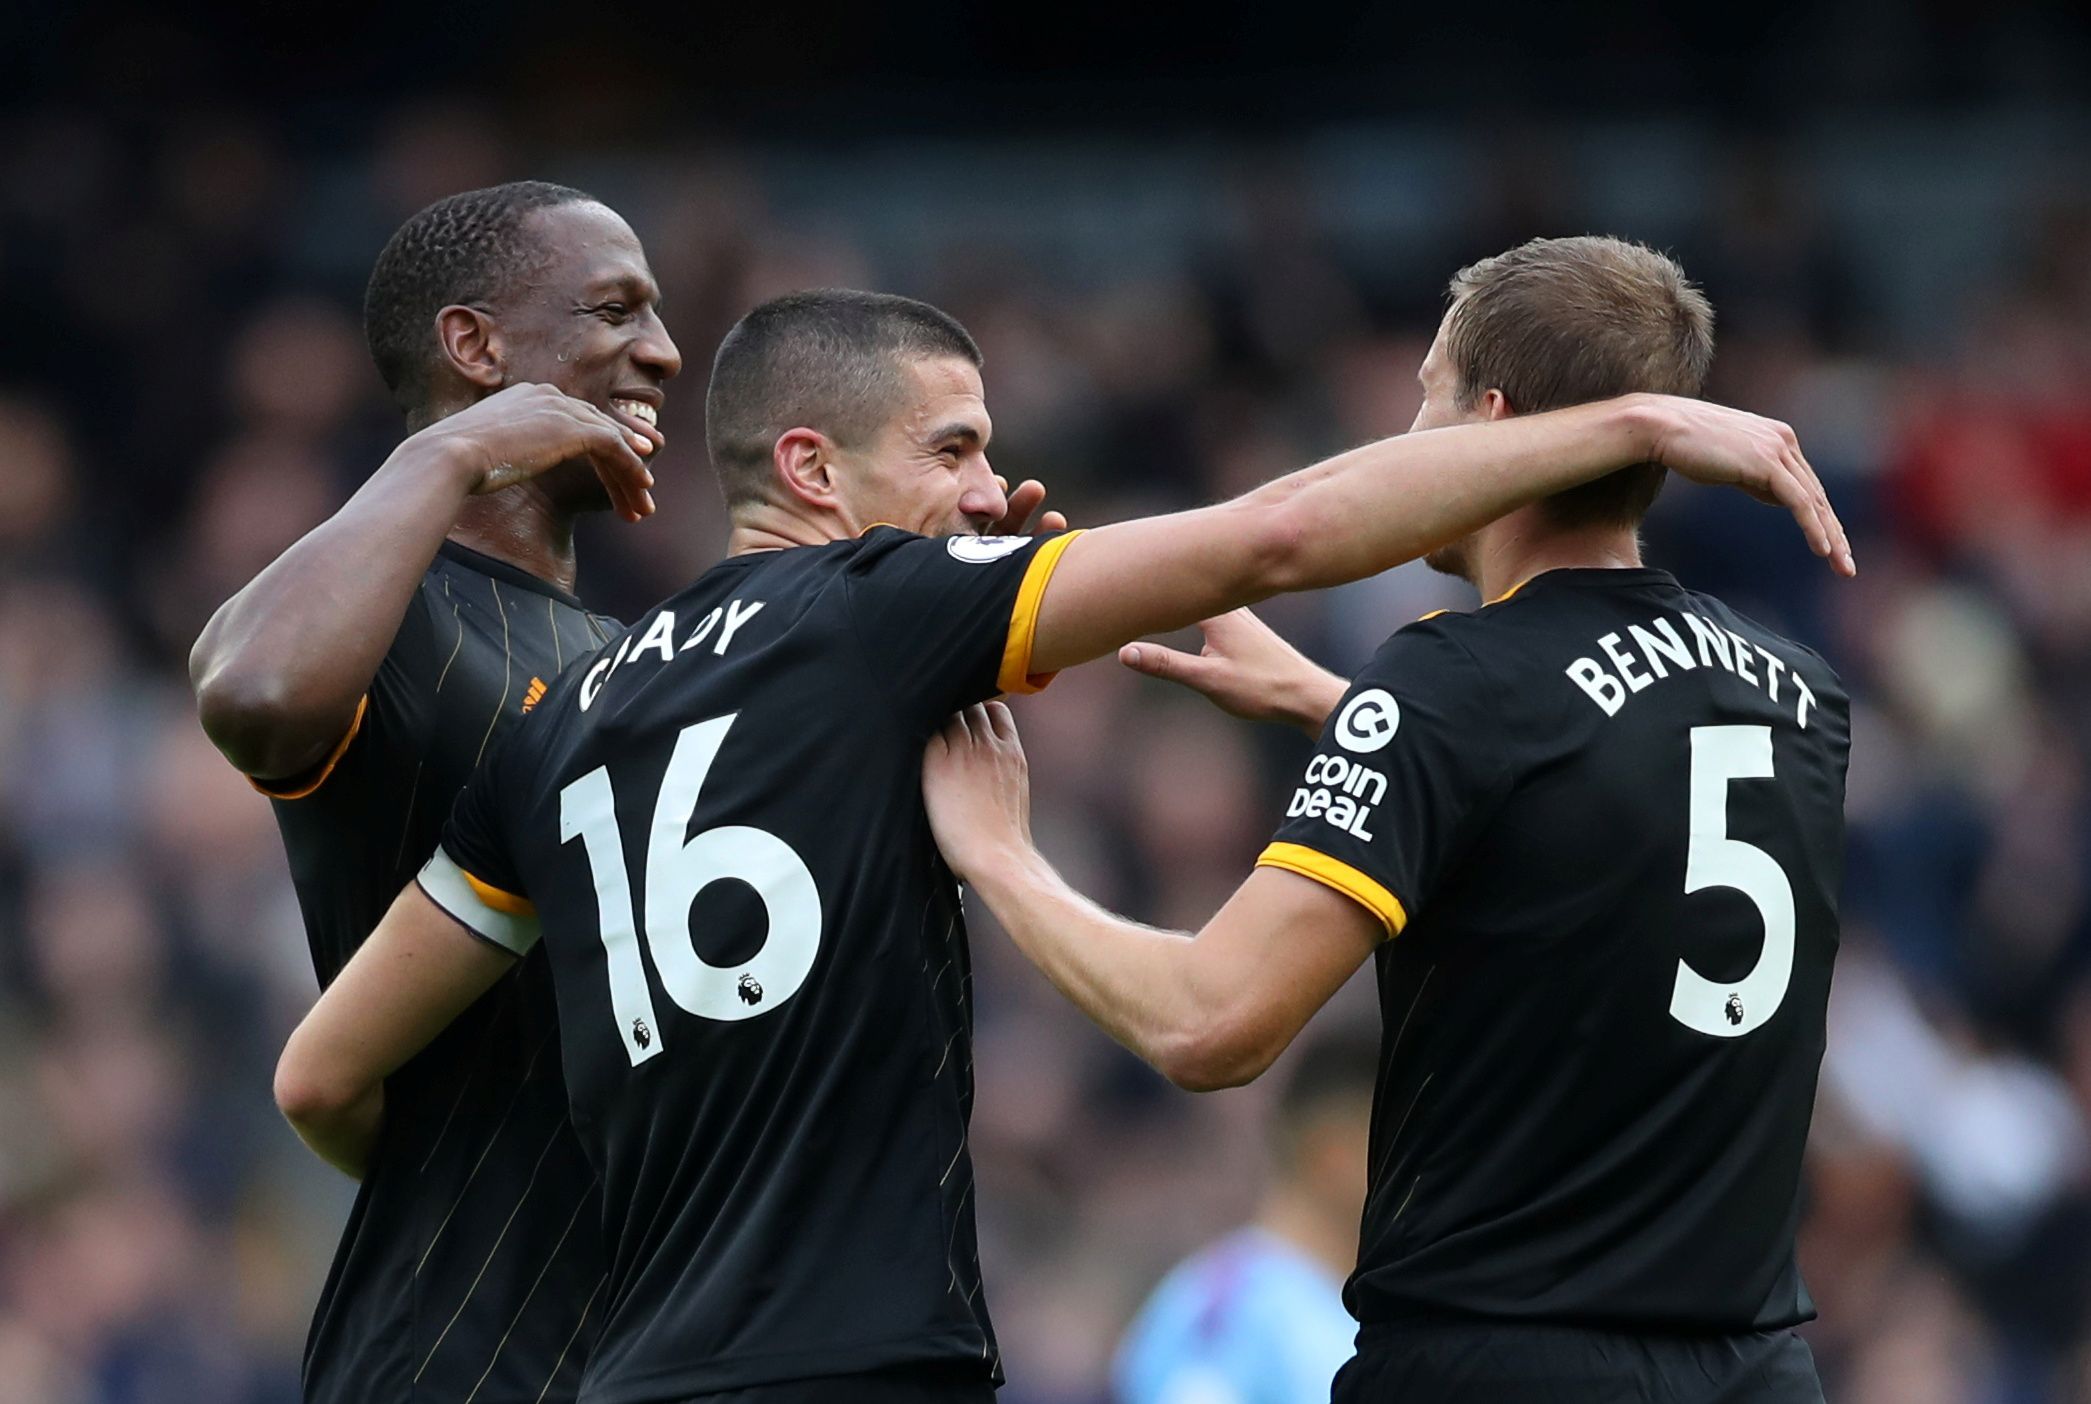 Soccer Football - Premier League - Manchester City v Wolverhampton Wanderers - Etihad Stadium, Manchester, Britain - October 6, 2019  Wolverhampton Wanderers' Conor Coady celebrates with Ryan Bennett and Willy Boly   Action Images via Reuters/Carl Recine  EDITORIAL USE ONLY. No use with unauthorized audio, video, data, fixture lists, club/league logos or 